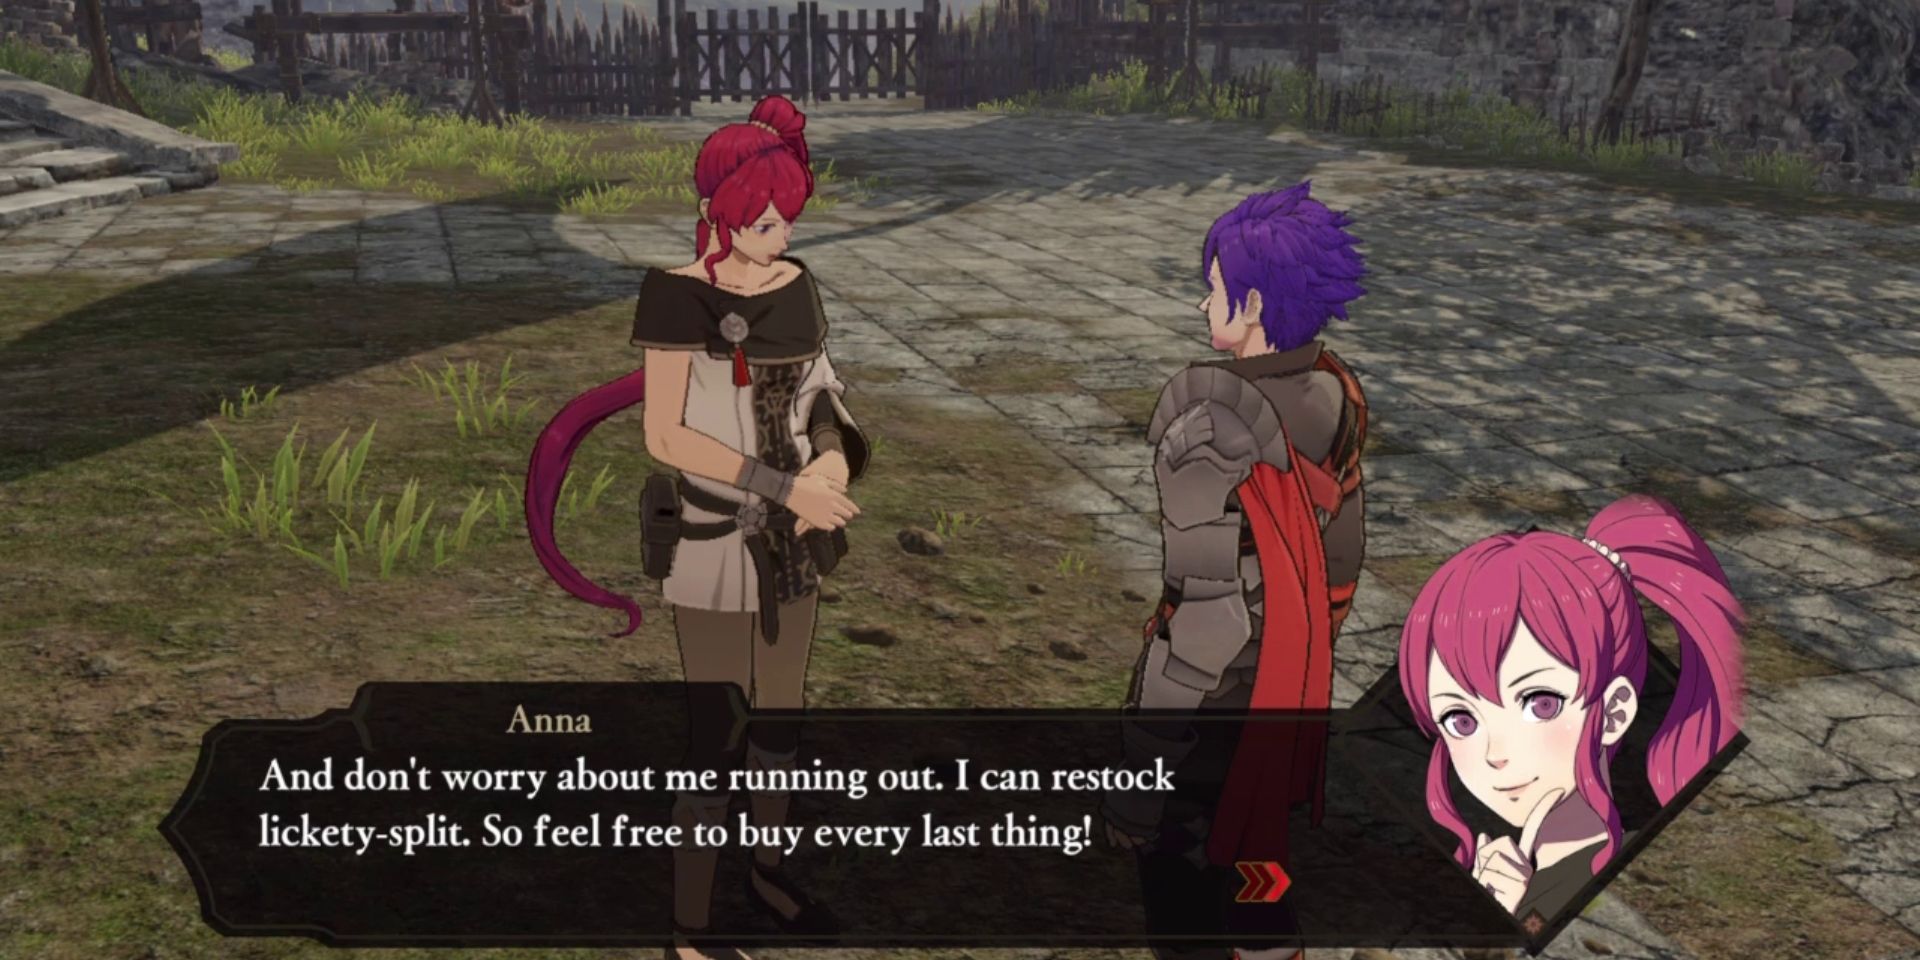 a purple haired man in plate armor with a red sash on his left shoulder speaks to a red haired woman in a white outfit with a black cover around her shoulders. The woman, Anna, says "And don't worry about me running out. I can restock lickety-split. So feel free to buy every last thing!"